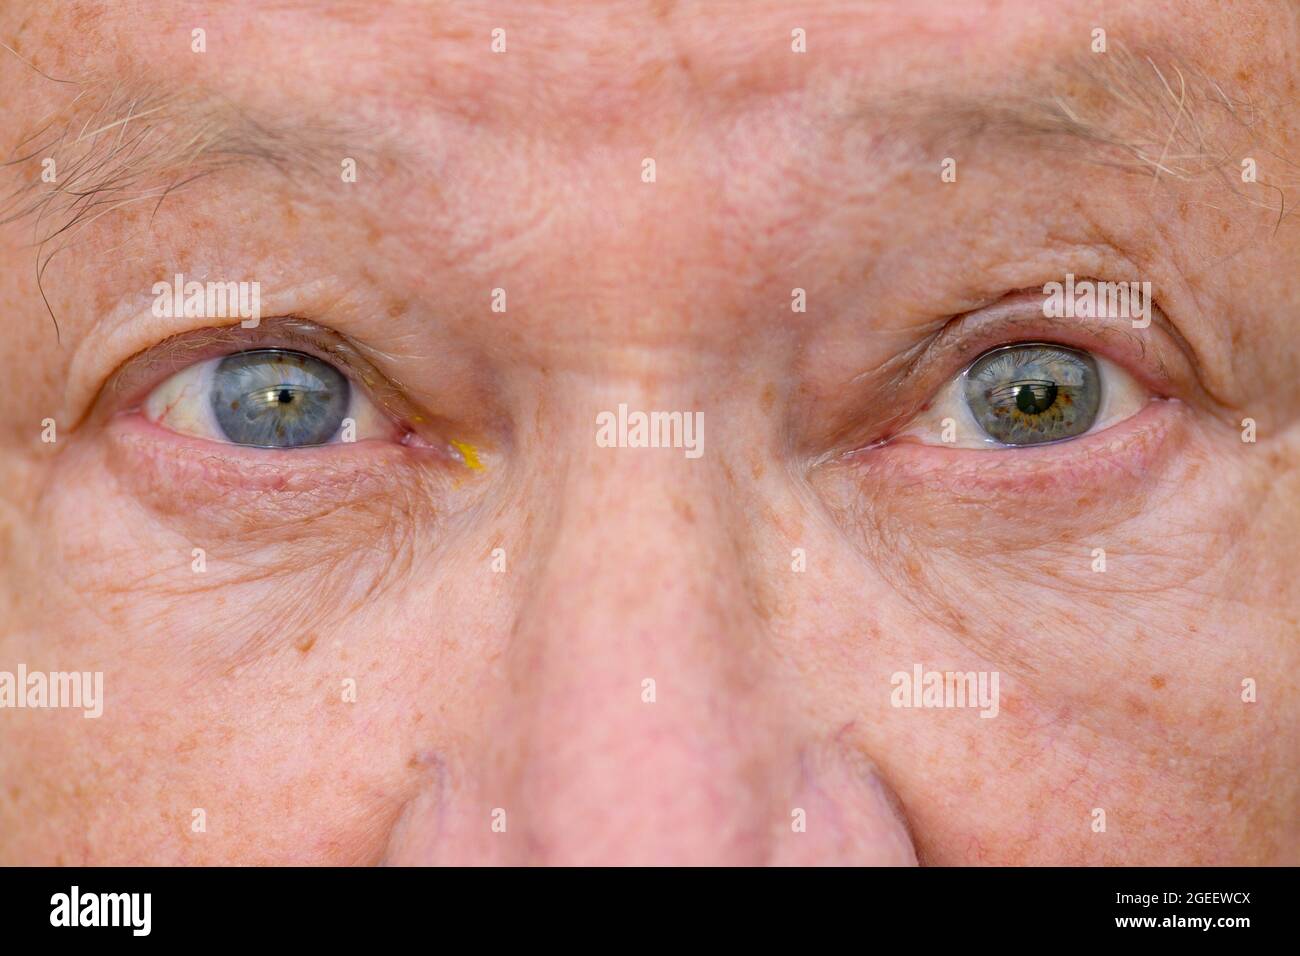 Extreme close up of the eyes of a senior man with eye disease showing unequal pupil dilation Stock Photo